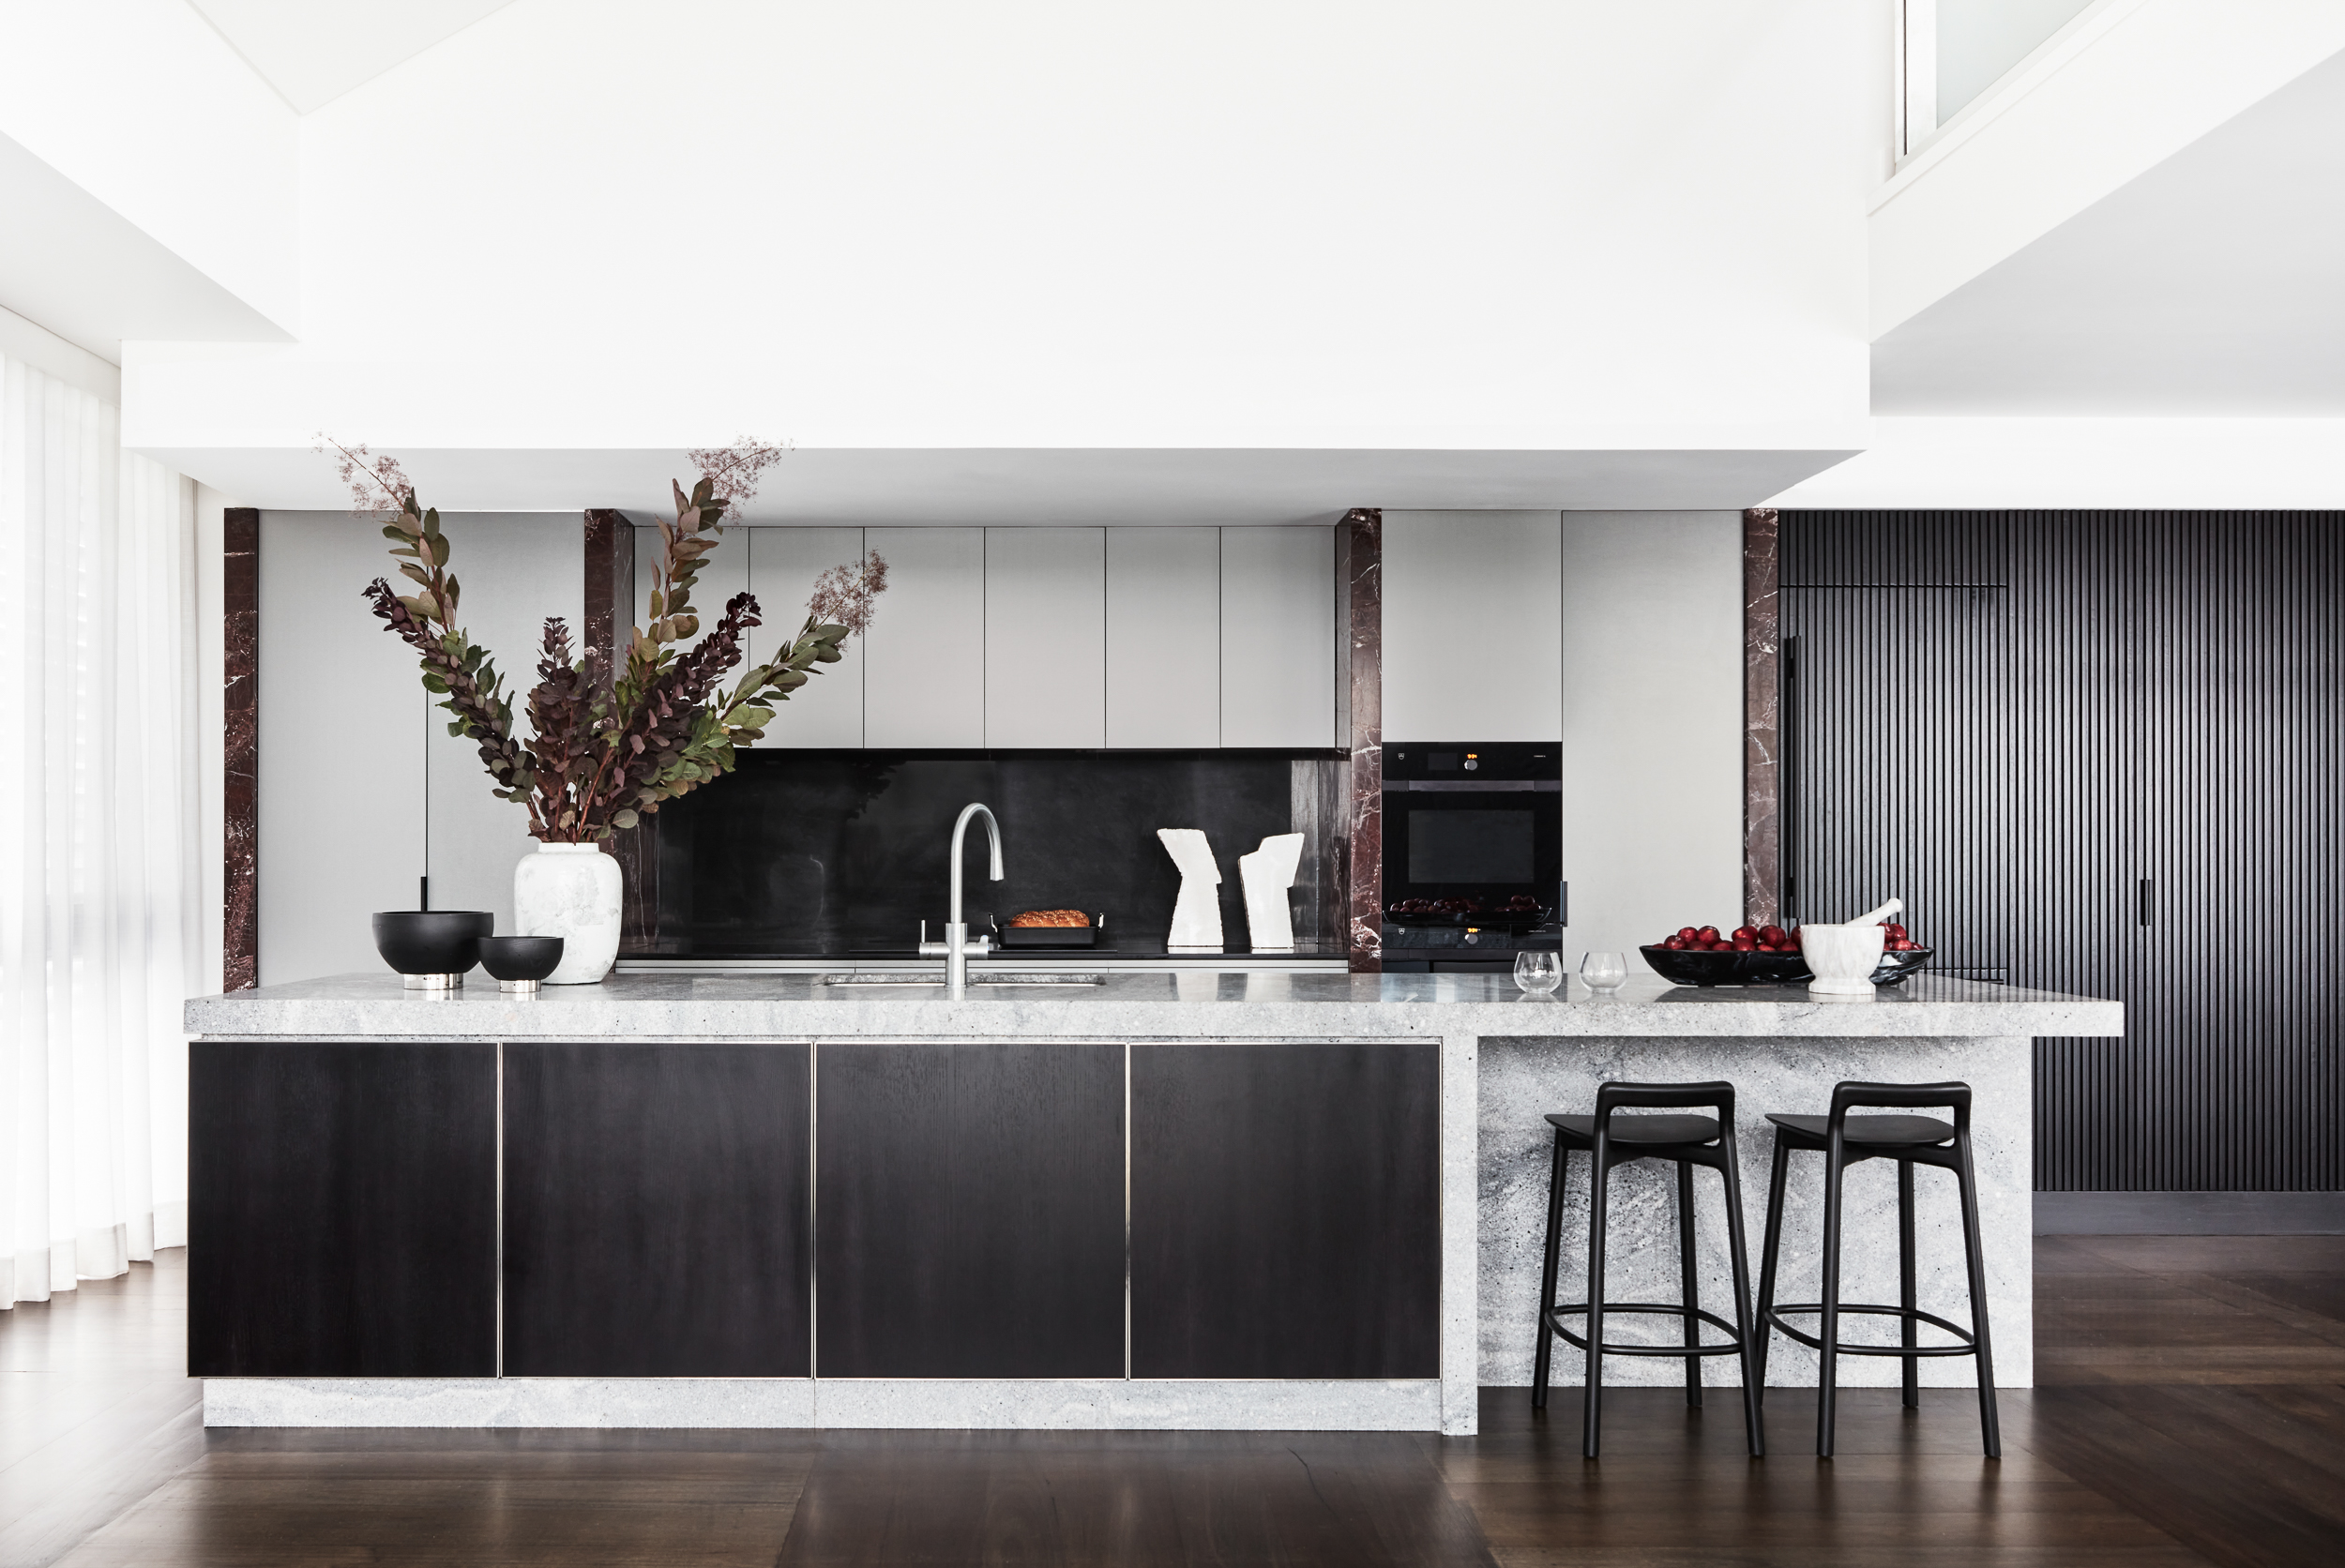 Architectural kitchen design and renovation with Rosso Levanto marble by Sydney interior designers, Brendan Wong Design